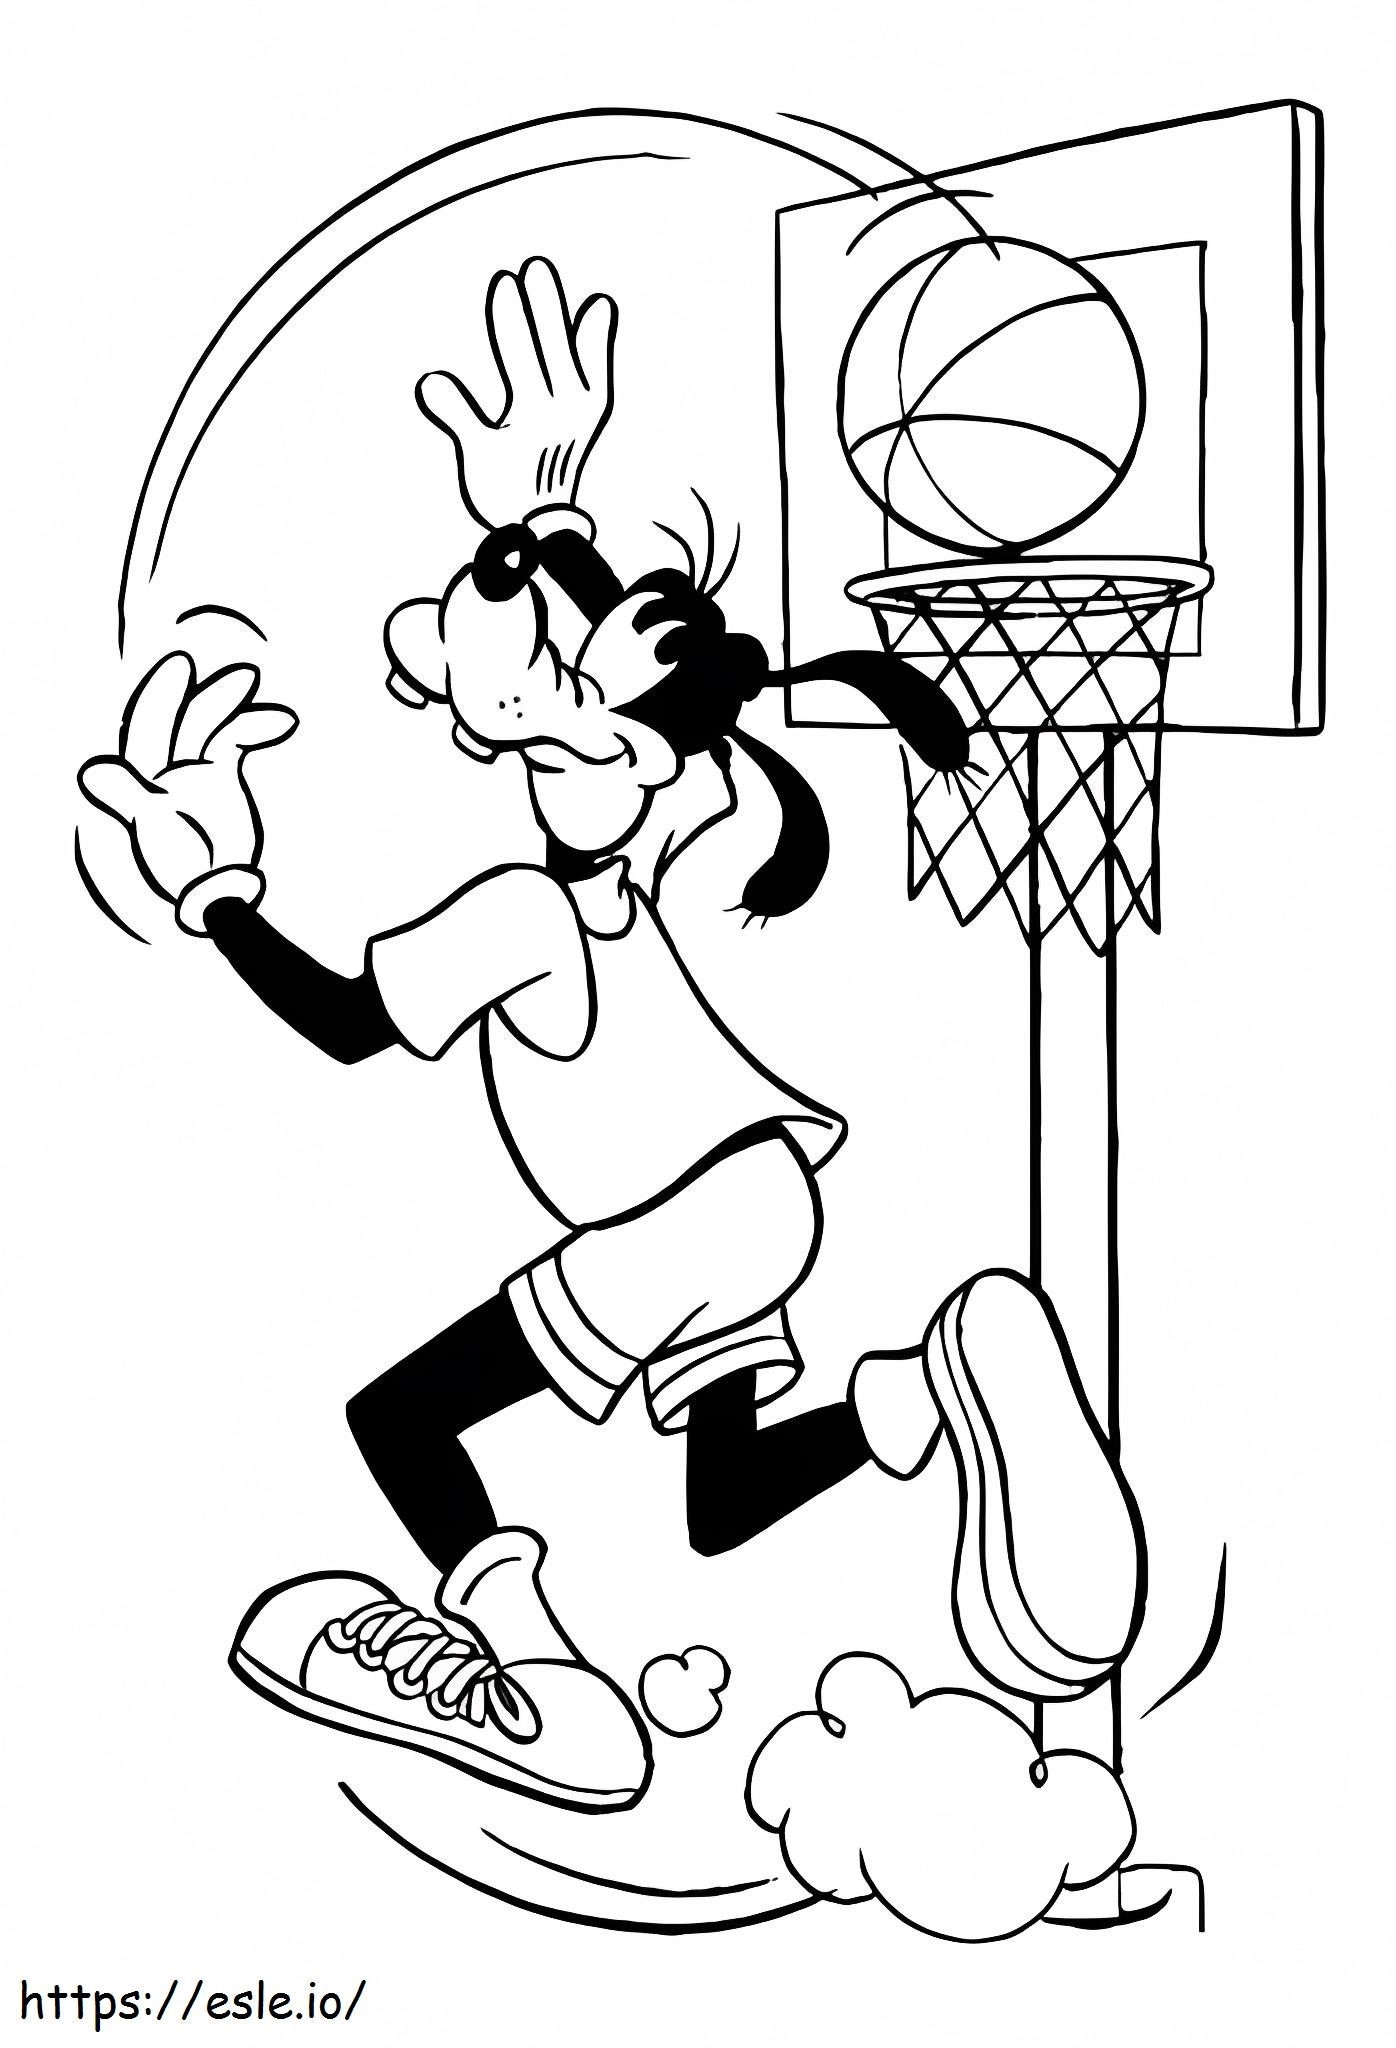 Goofy Playing Basketball coloring page